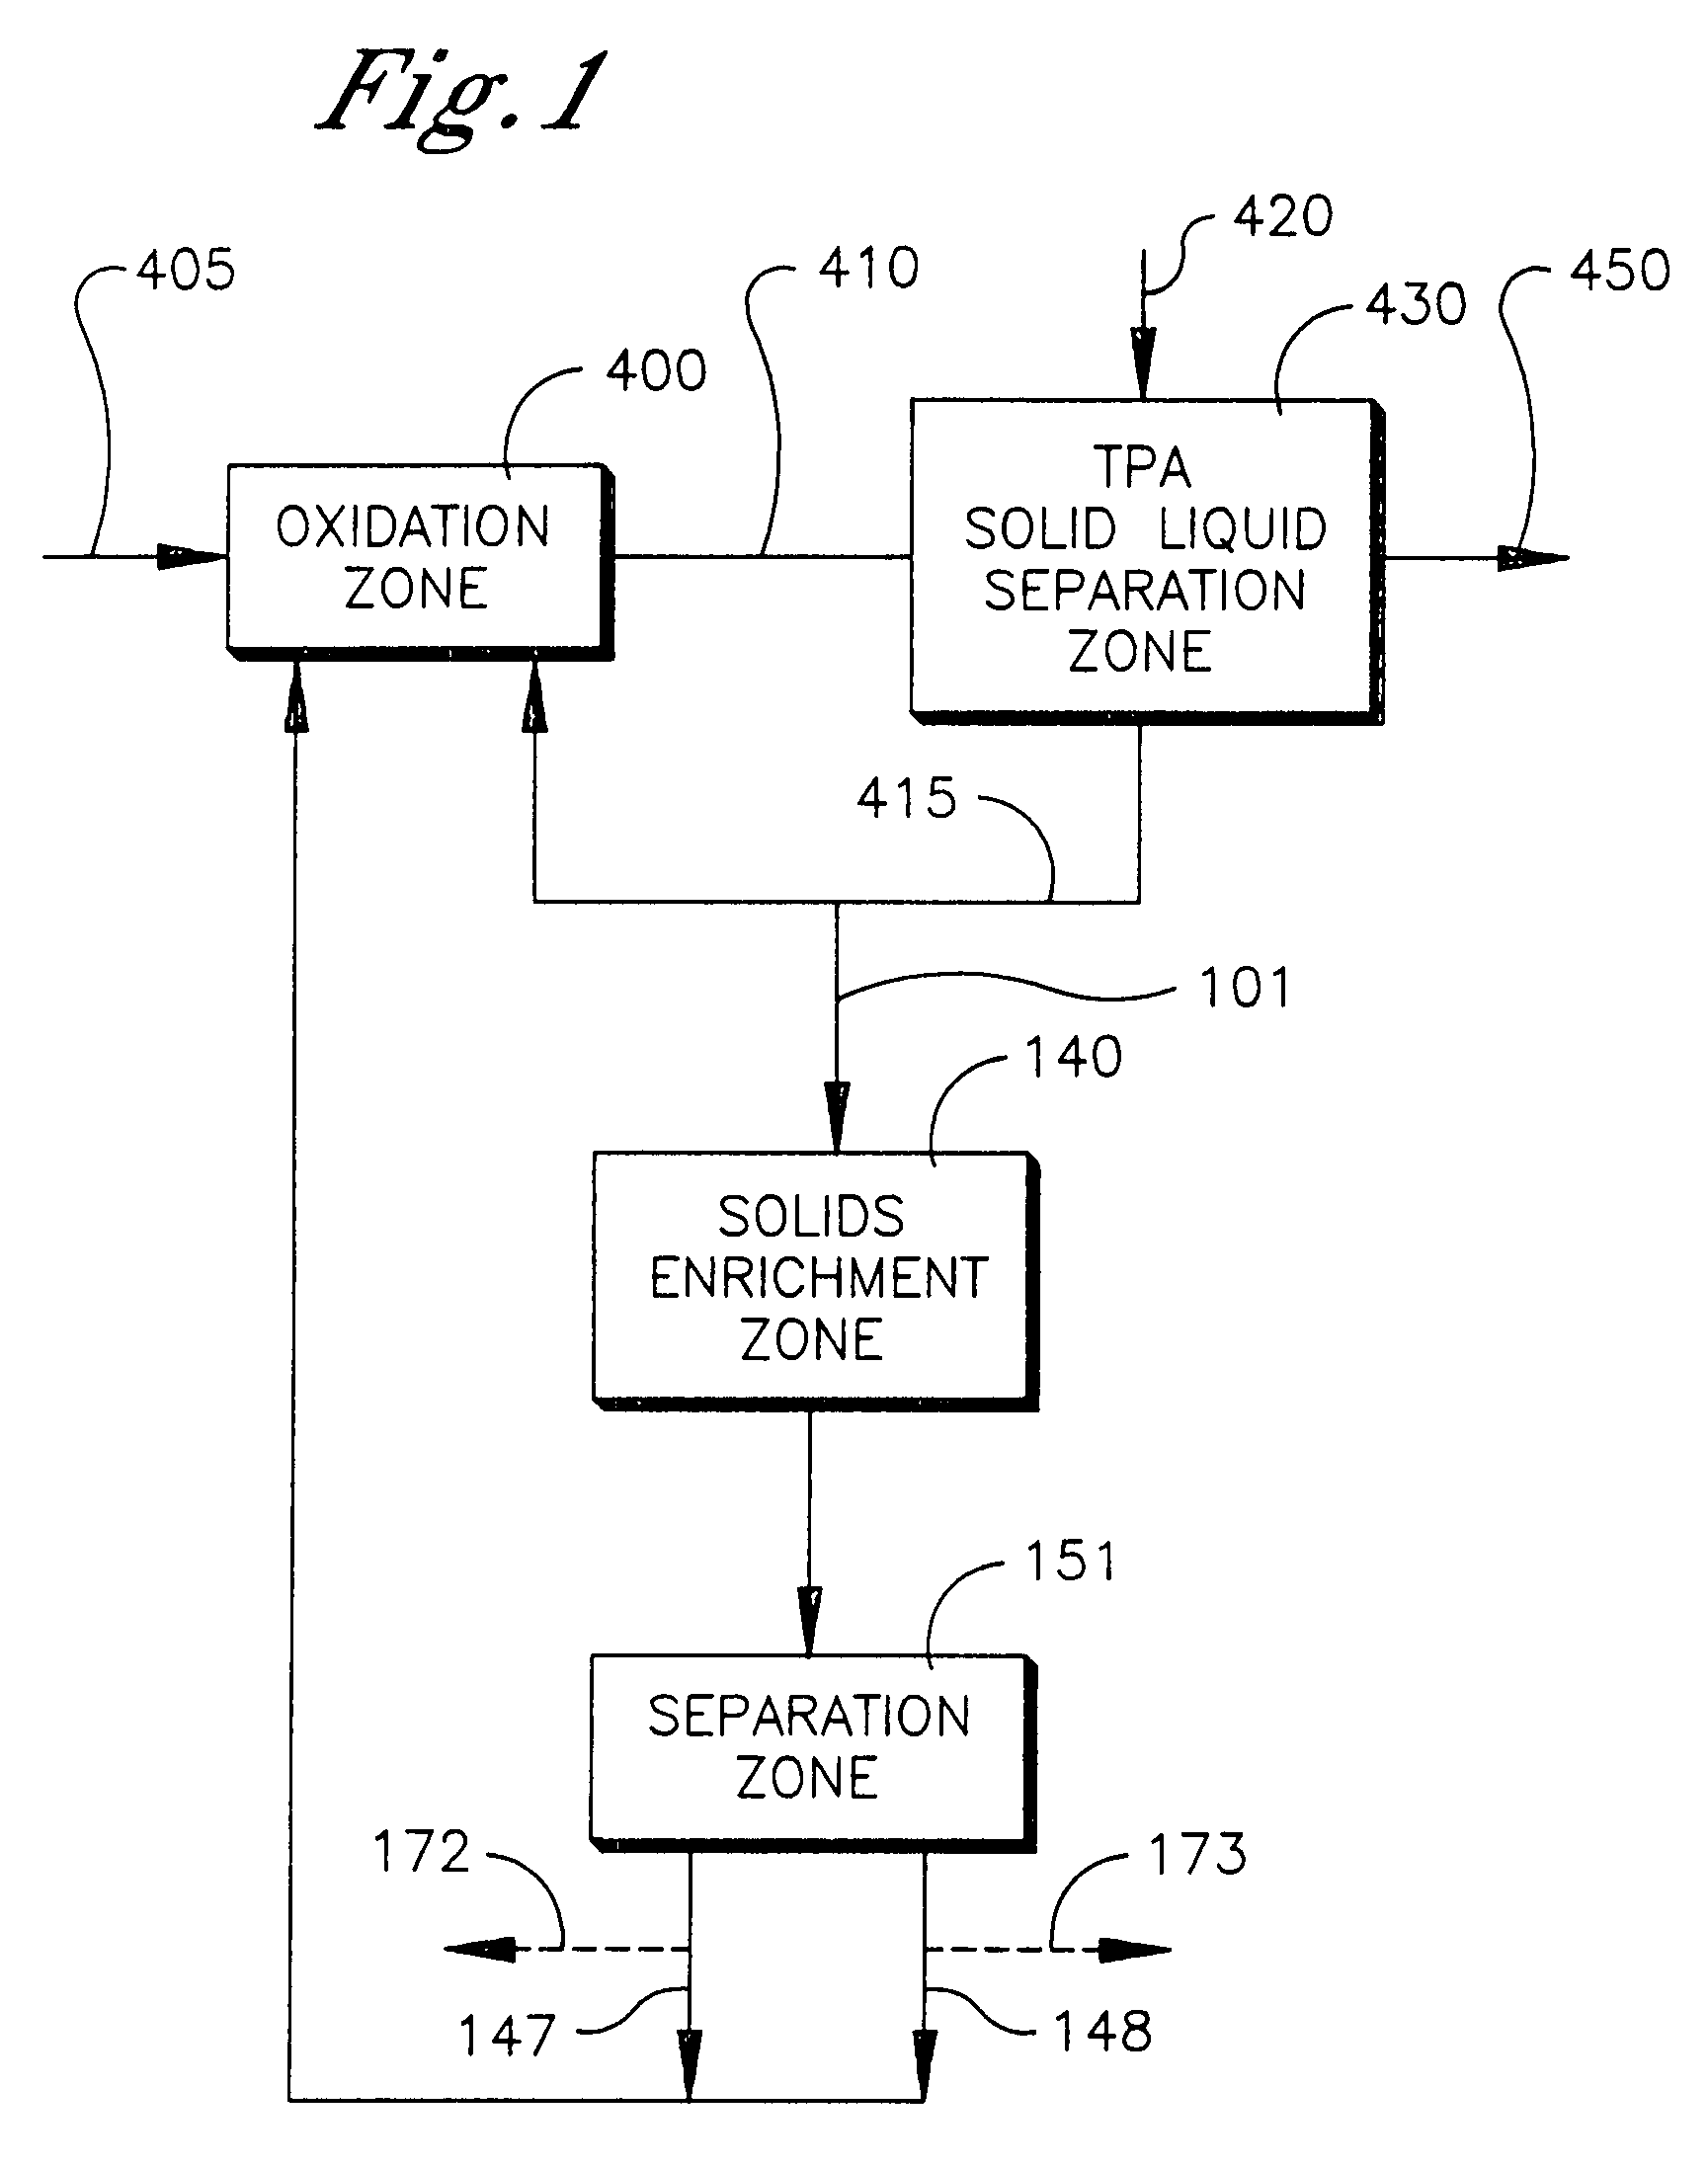 Process for removal of impurities from an oxidizer purge stream